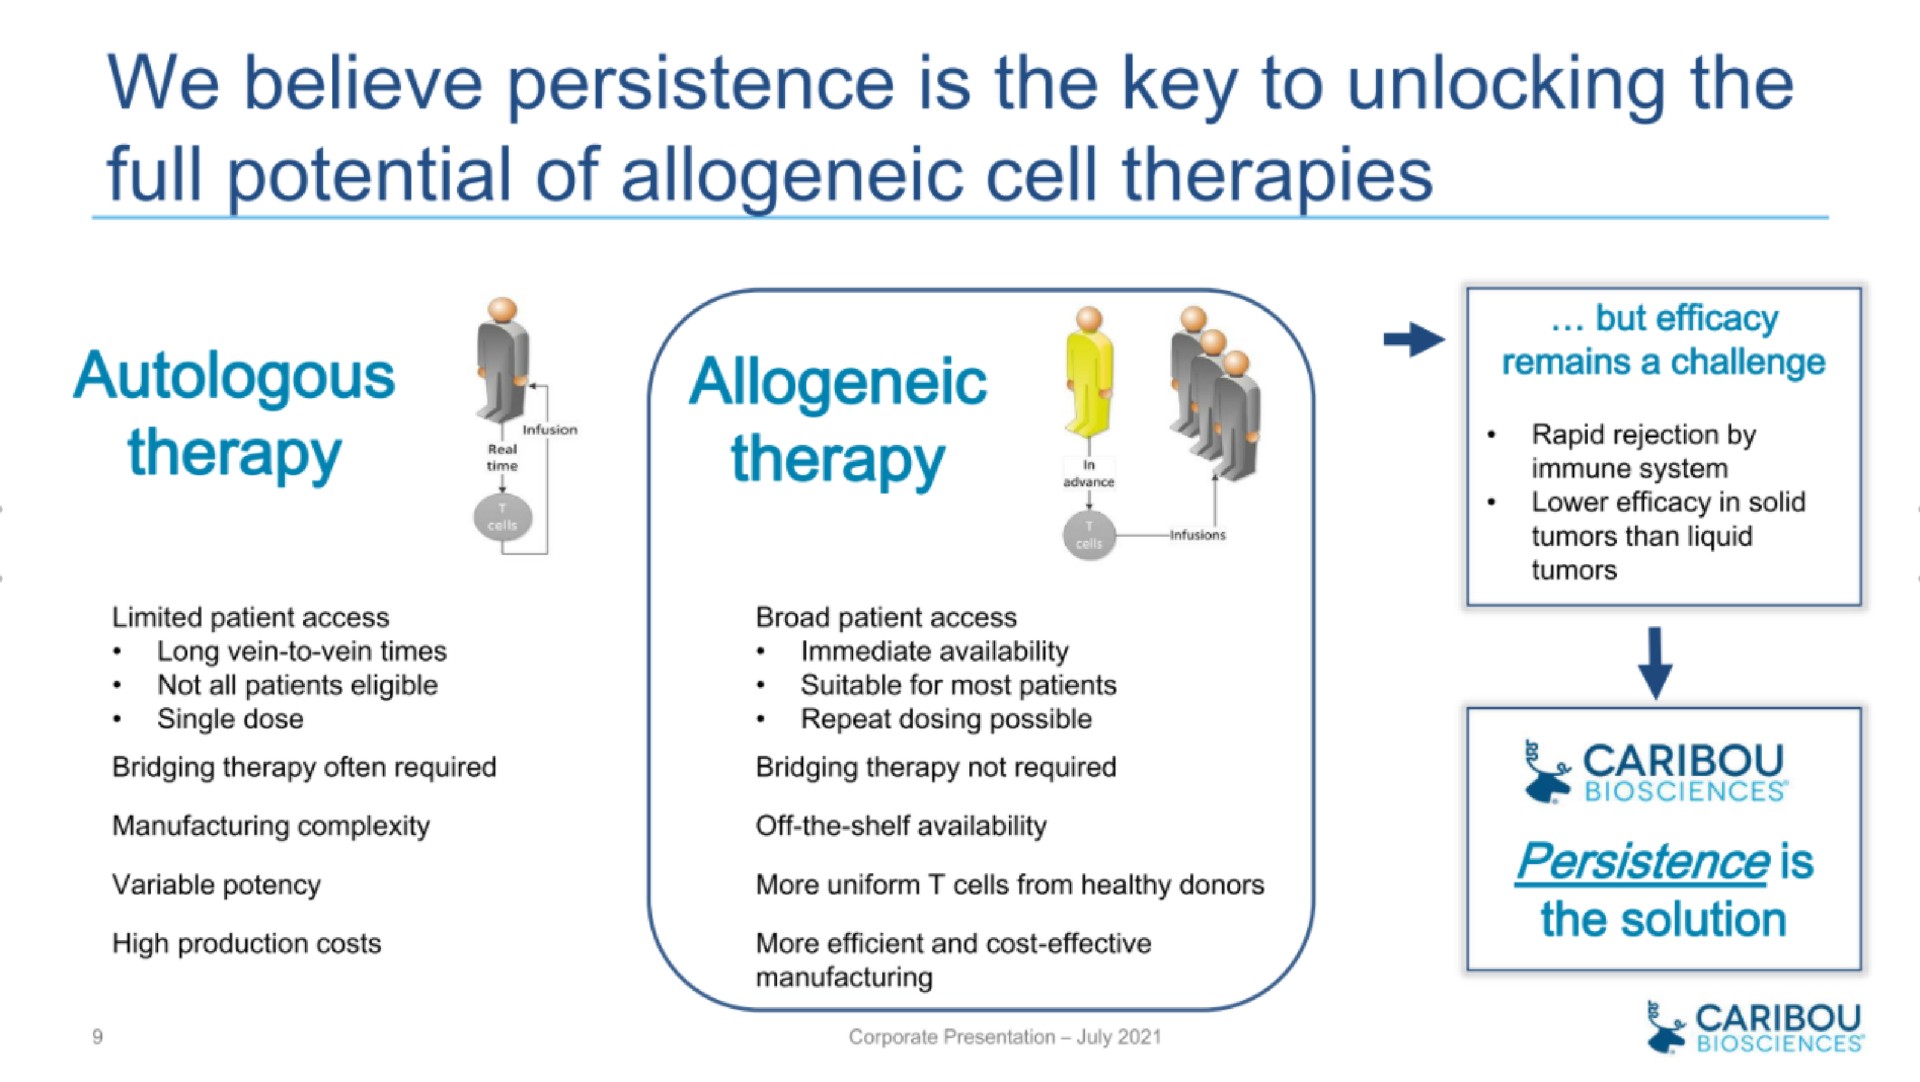 we believe persistence is the key to unlocking the full potential of cell therapies | Caribou Biosciences